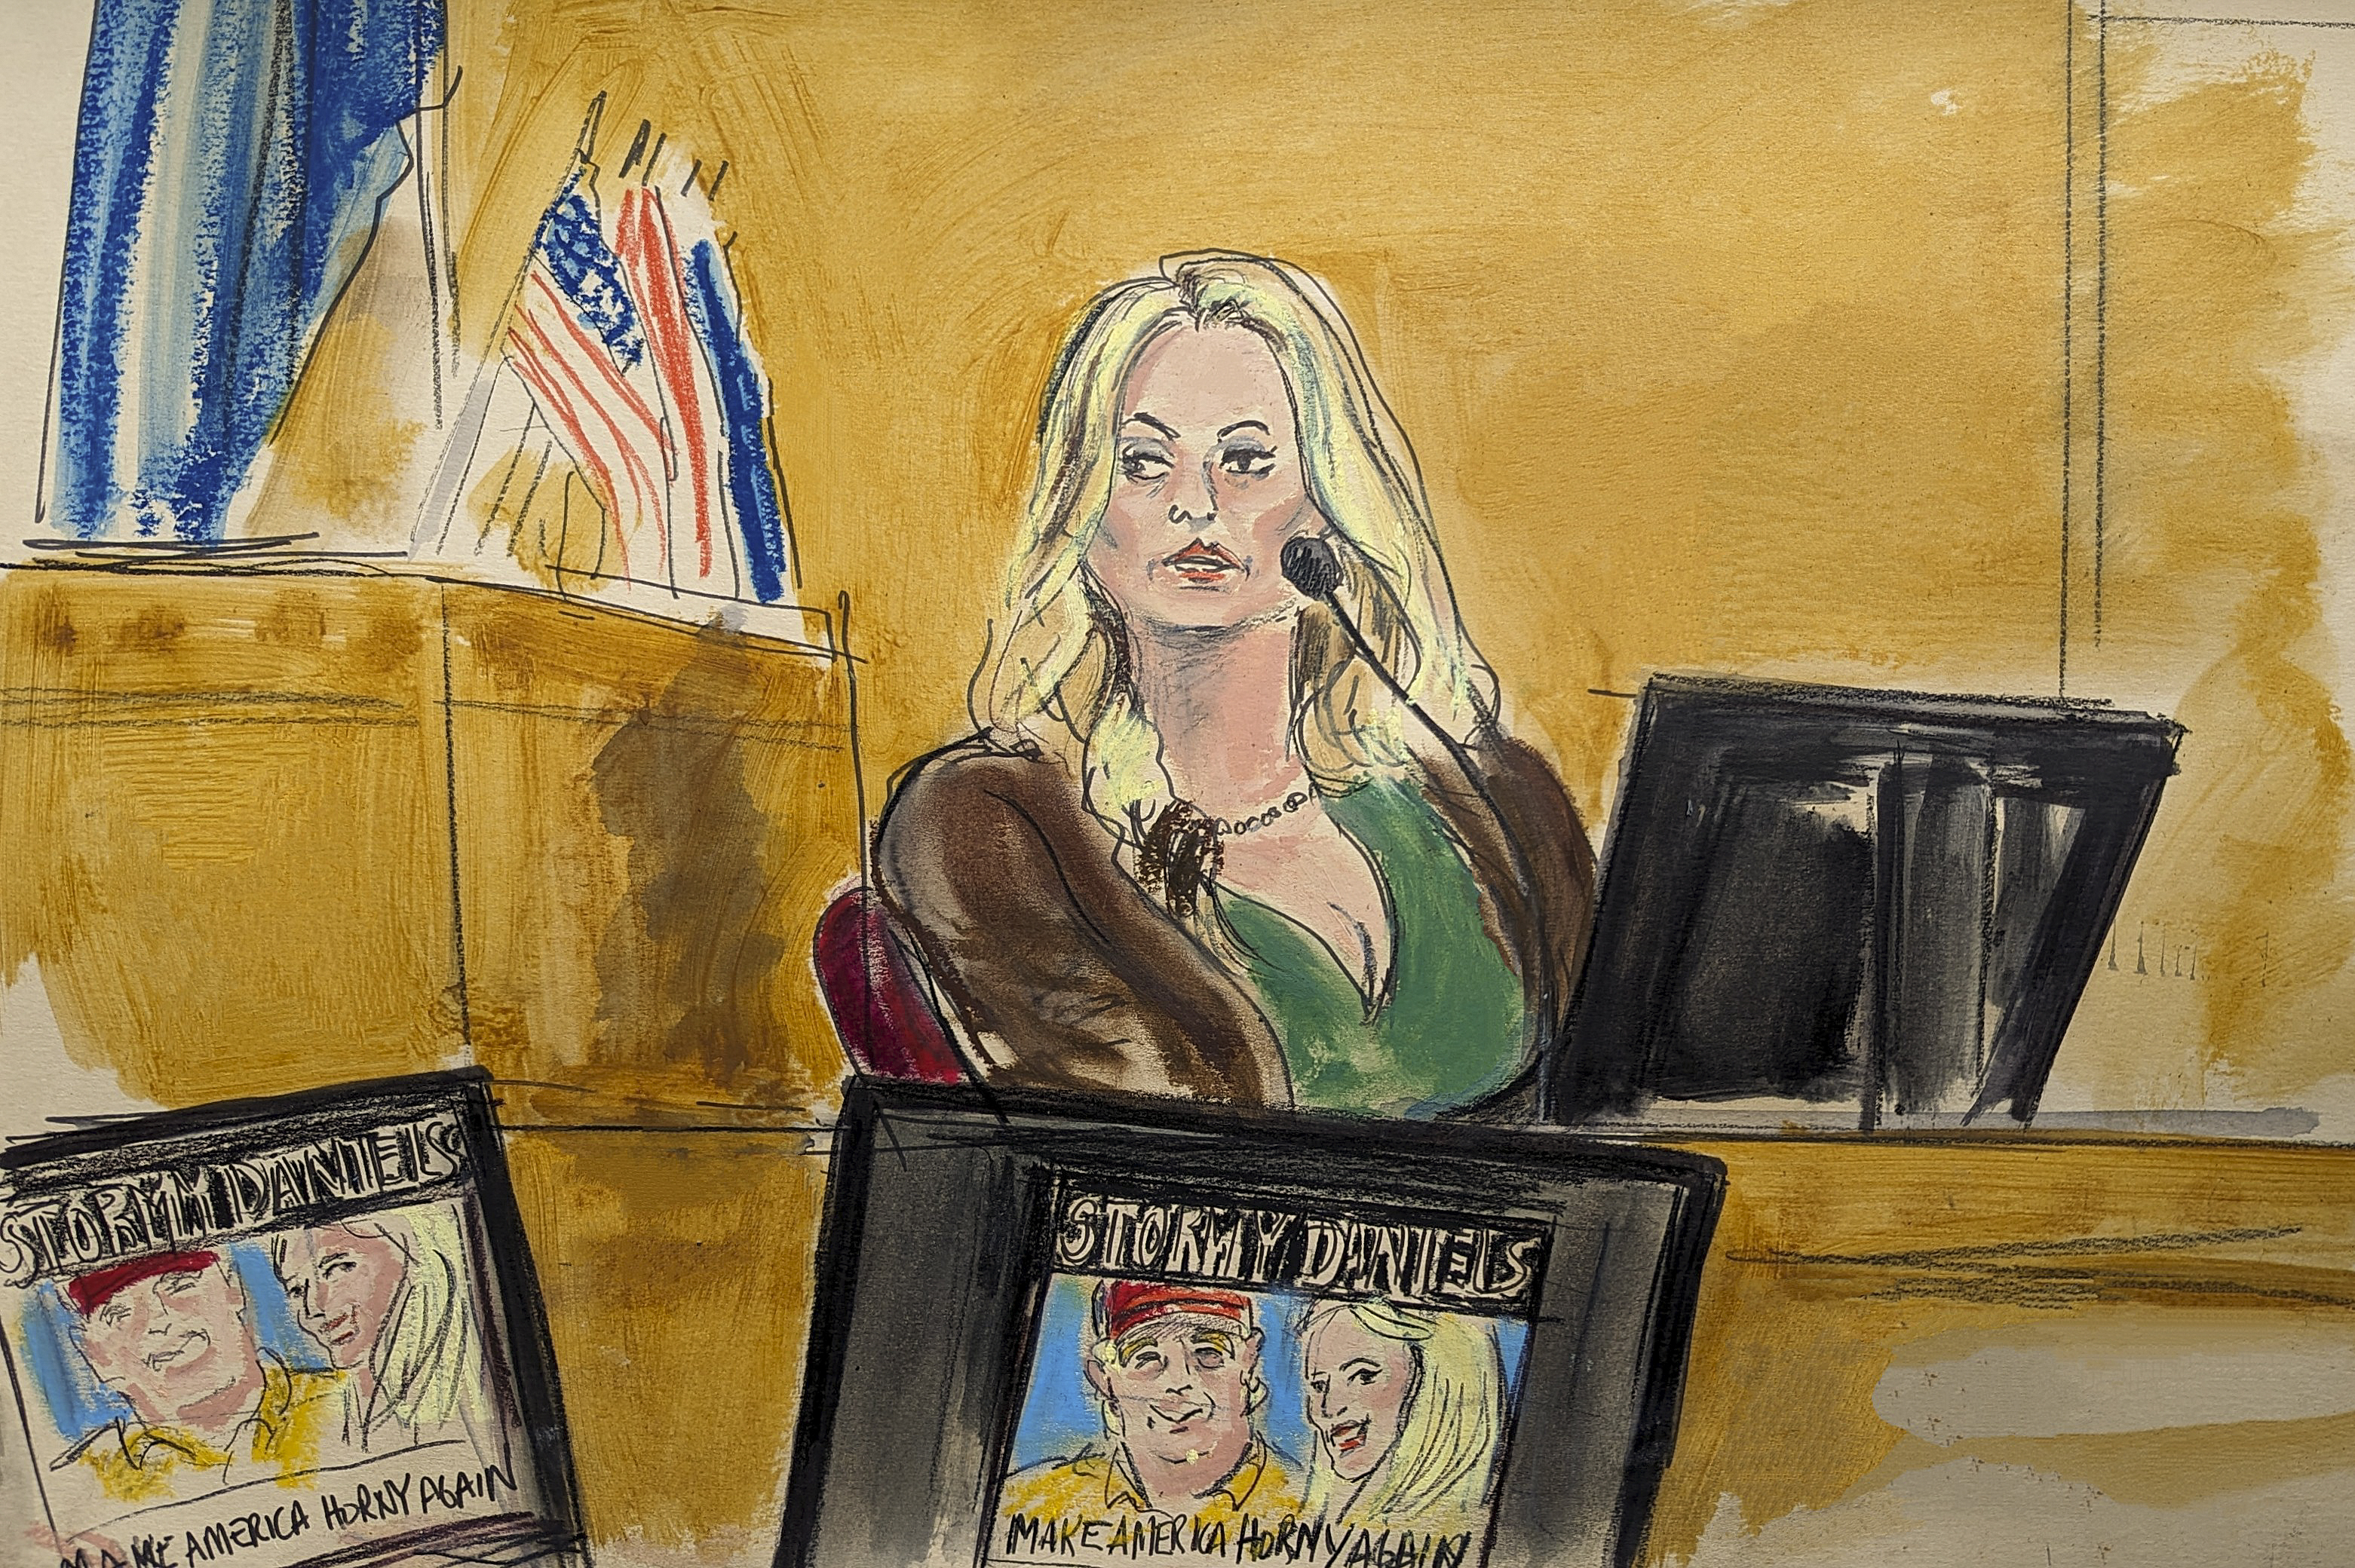 how sketch artists at trump’s hush money trial capture what cameras can’t